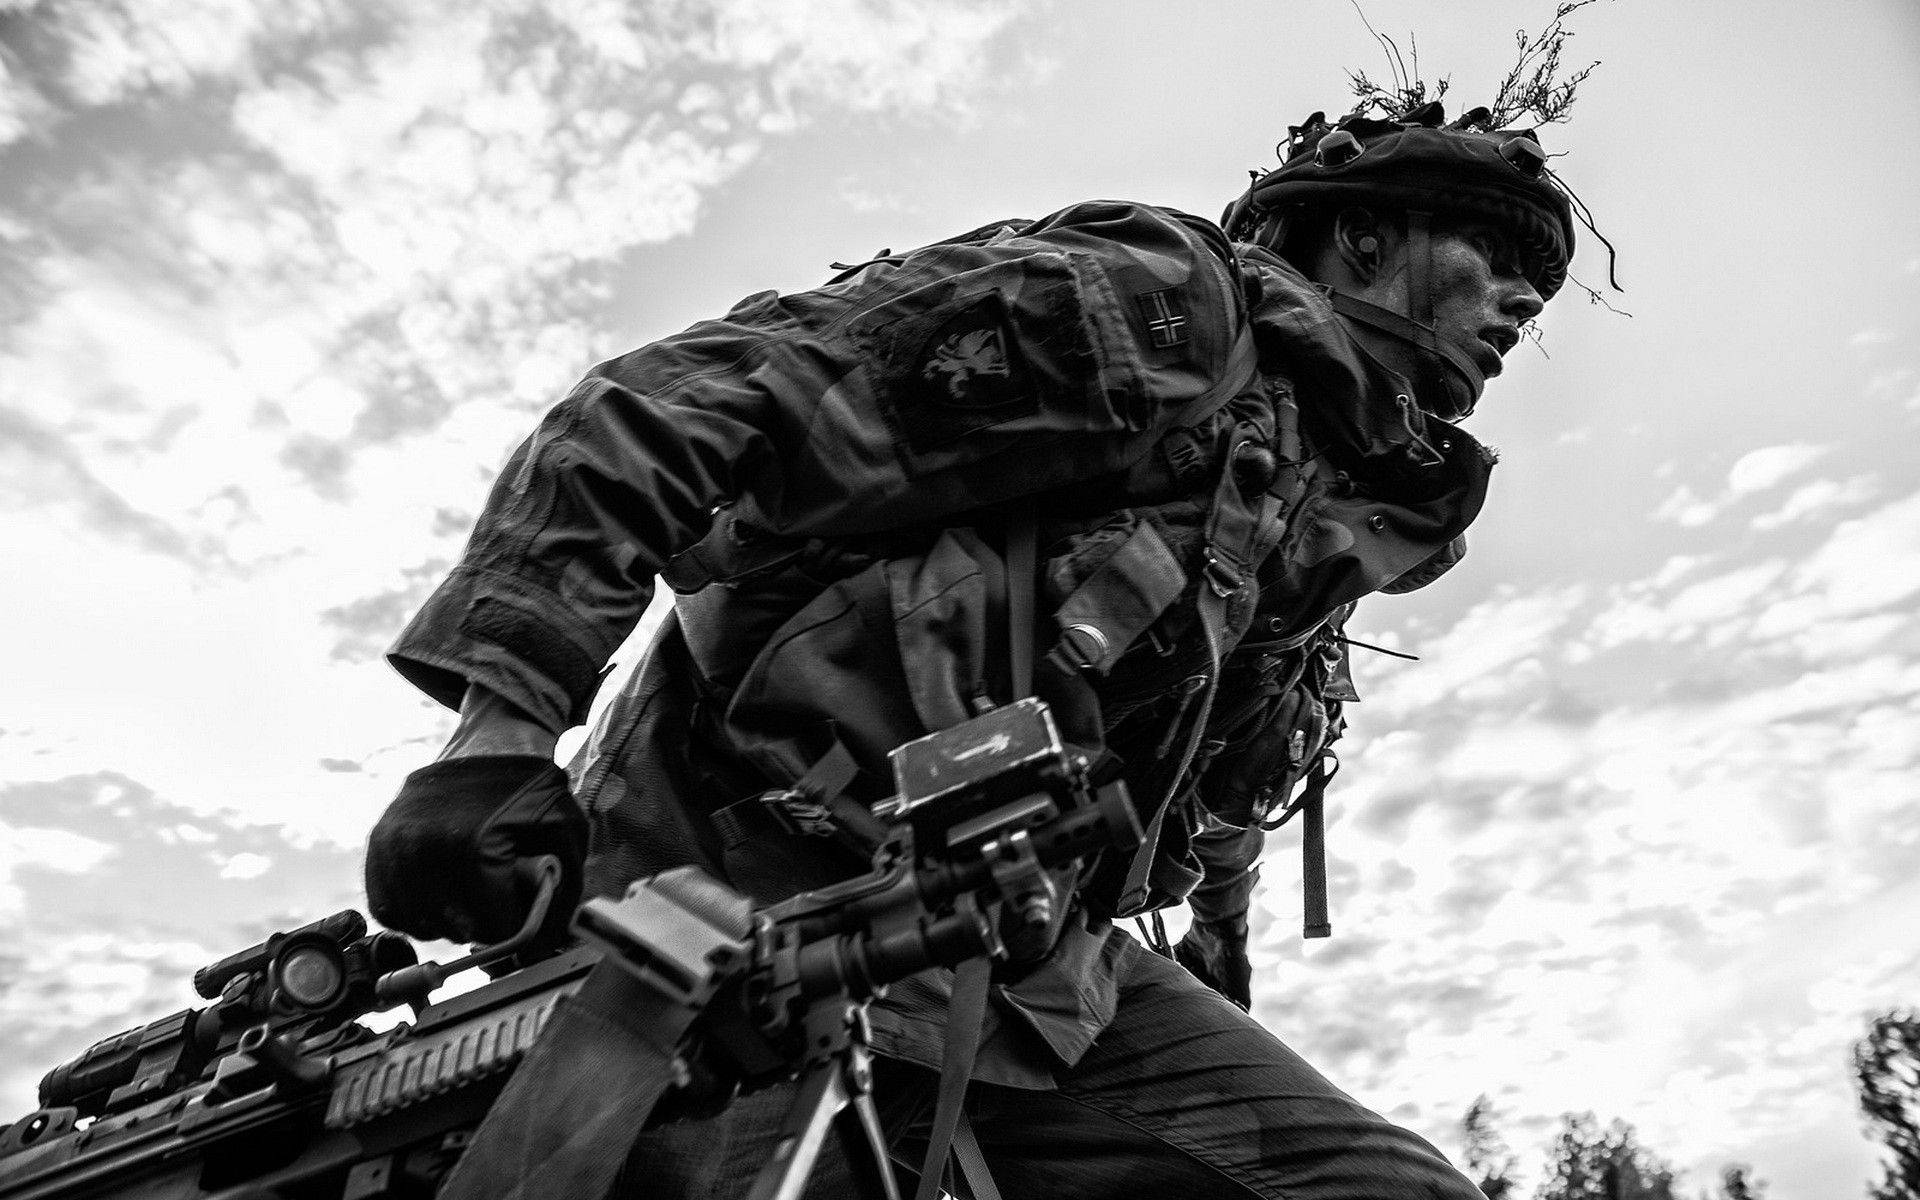 Armed Military In Monochrome Wallpaper